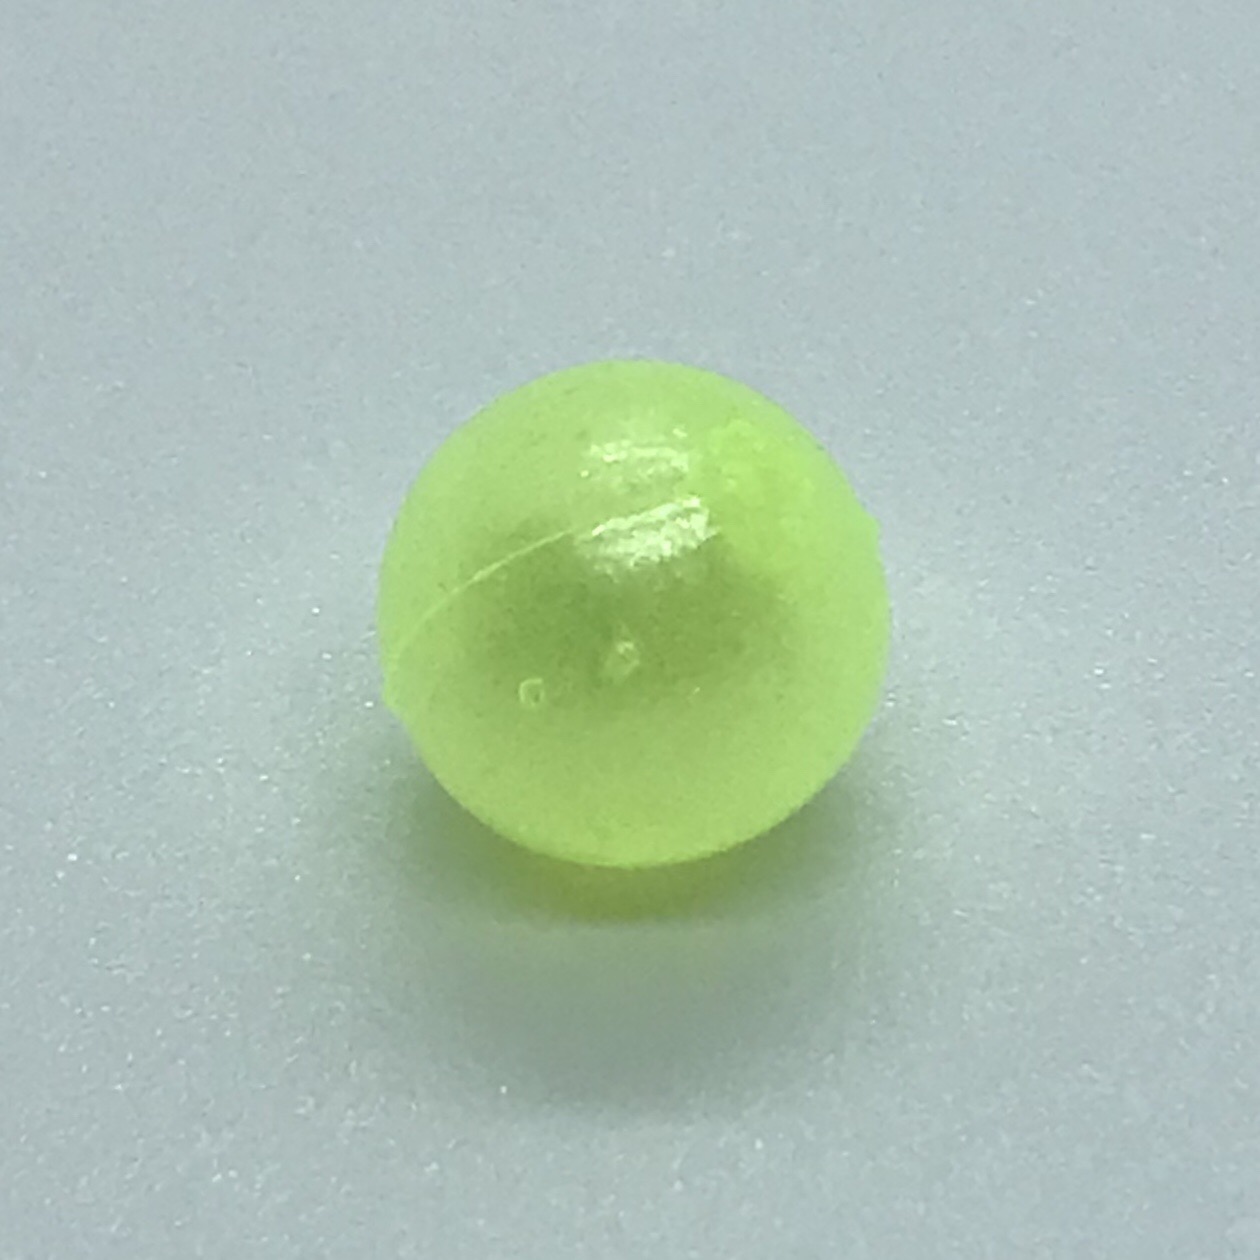 https://mcproductimages.s3-us-west-2.amazonaws.com/bnr-tackle/bnr-tackle-soft-beads-loose-packs/bnr-tackle-softbeads-meangreen-2.jpeg